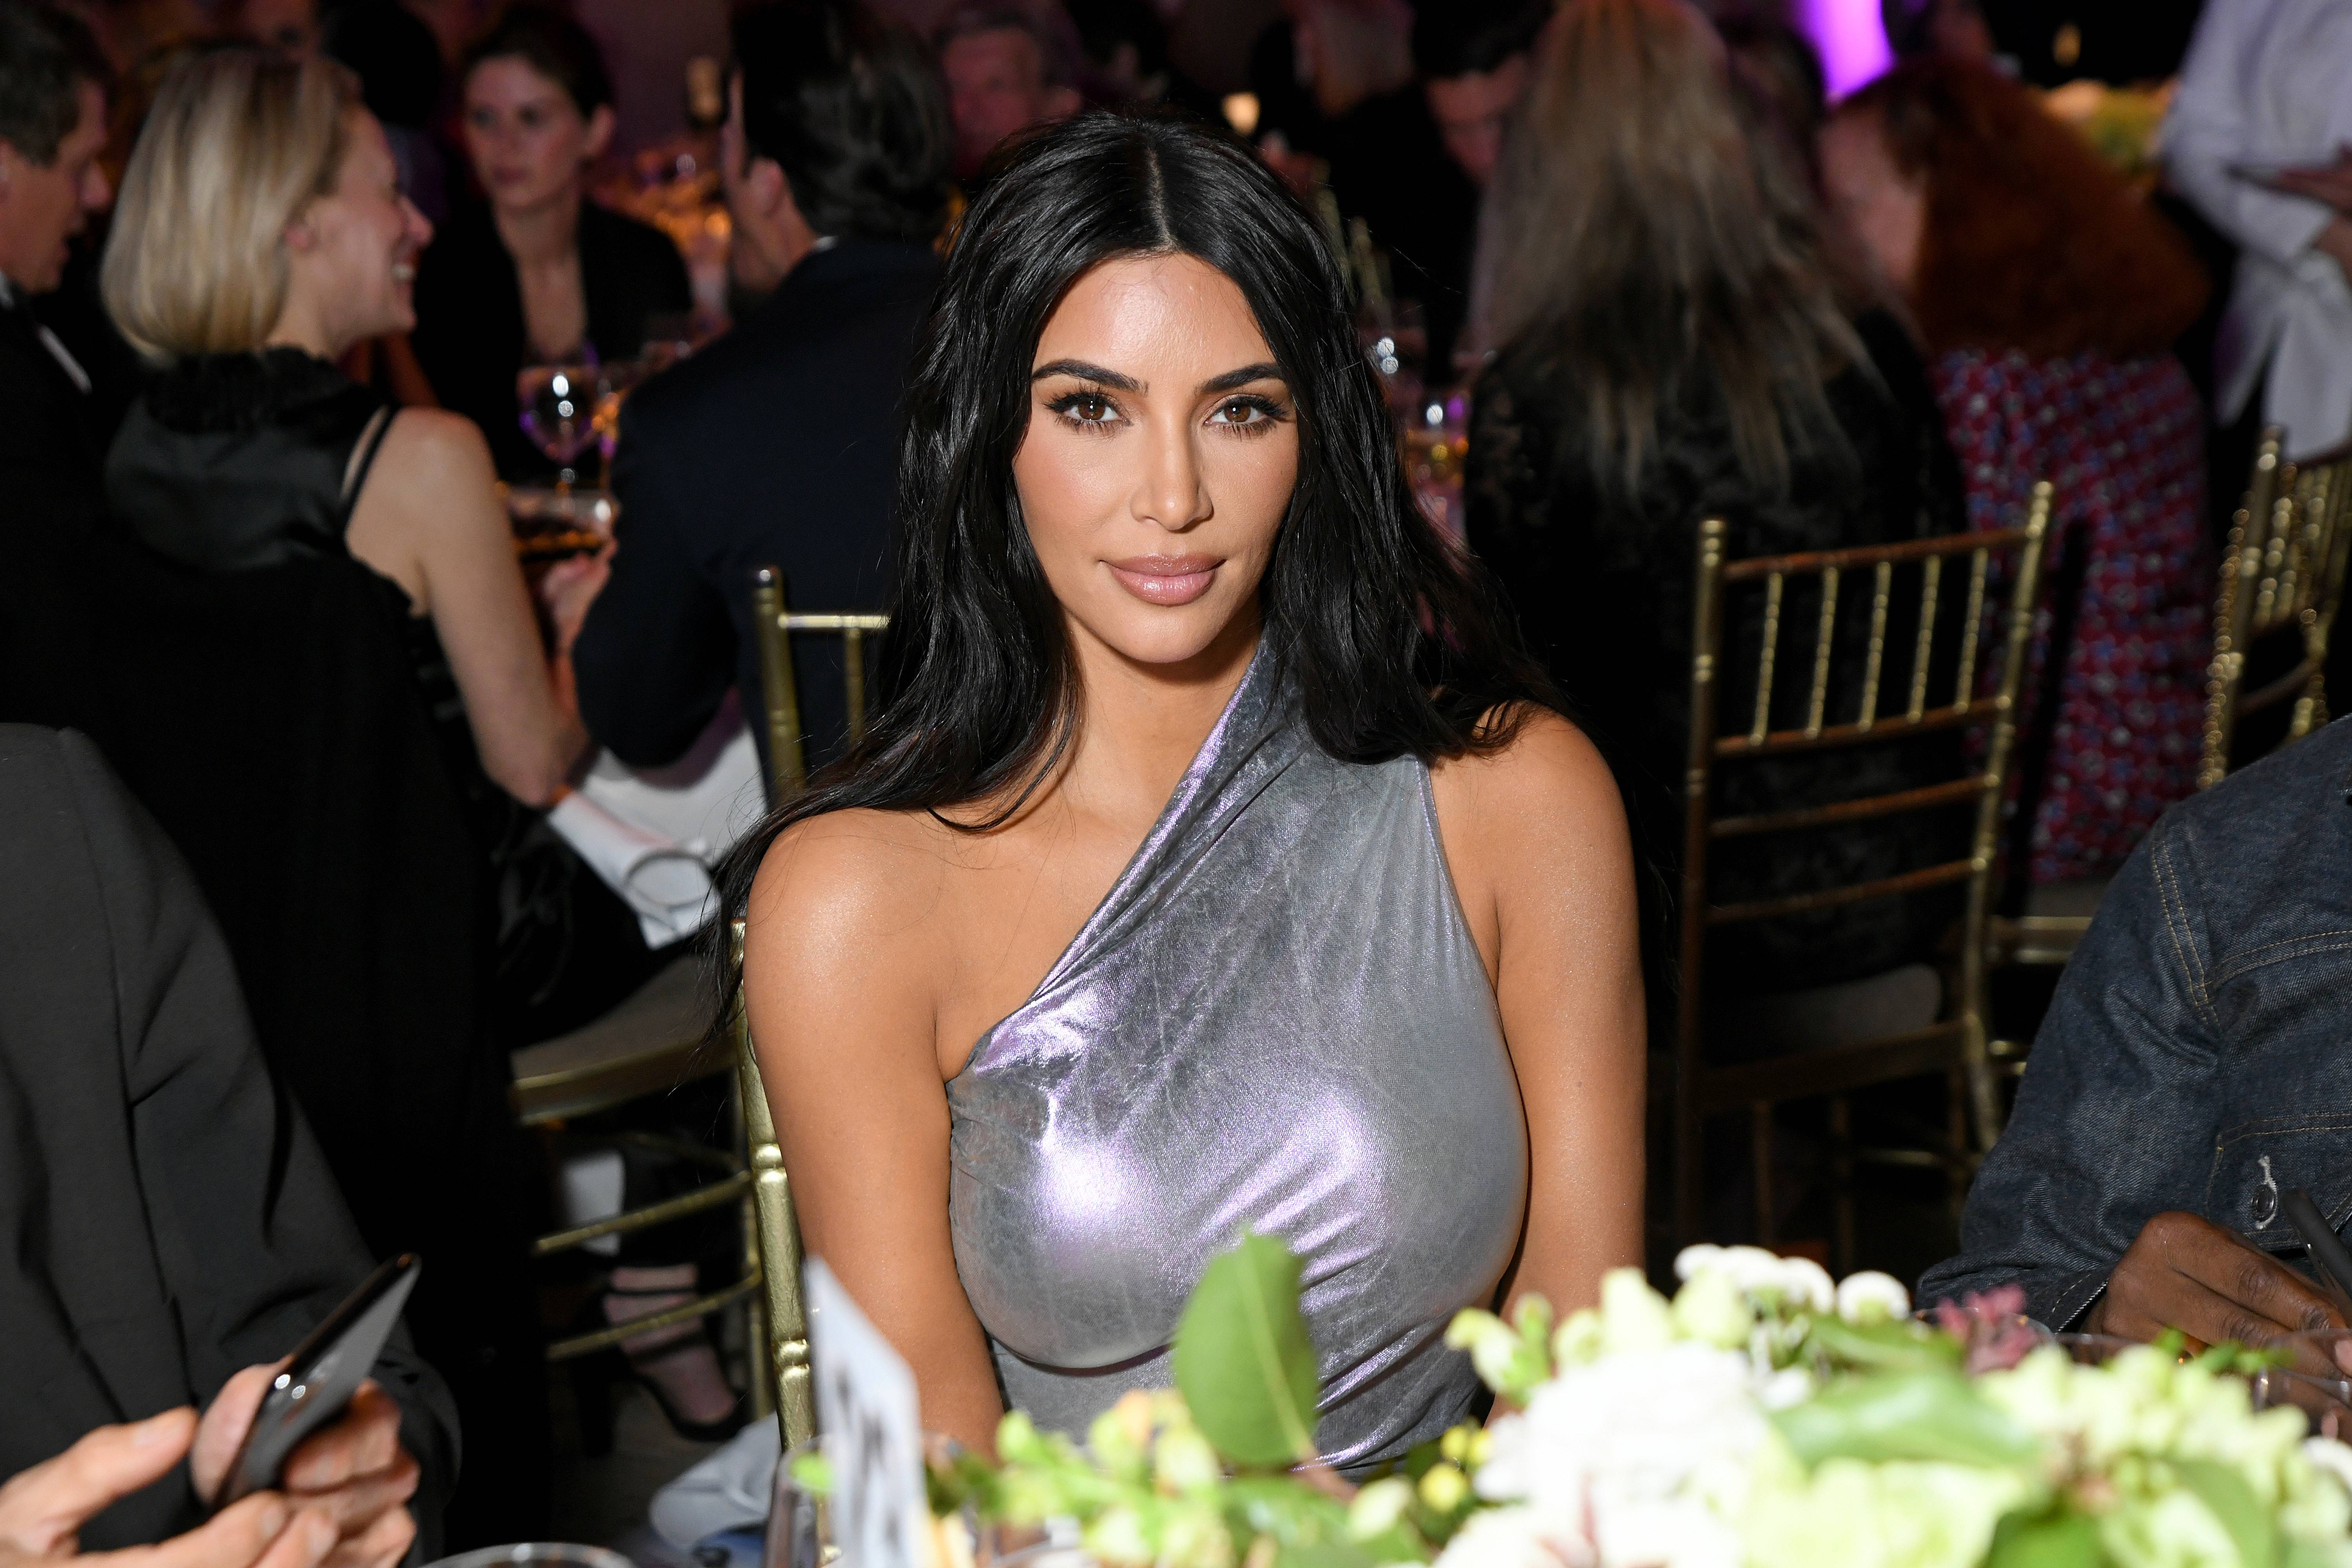 Just what we need, Kim K's maternity shapewear to cure your pregnant body